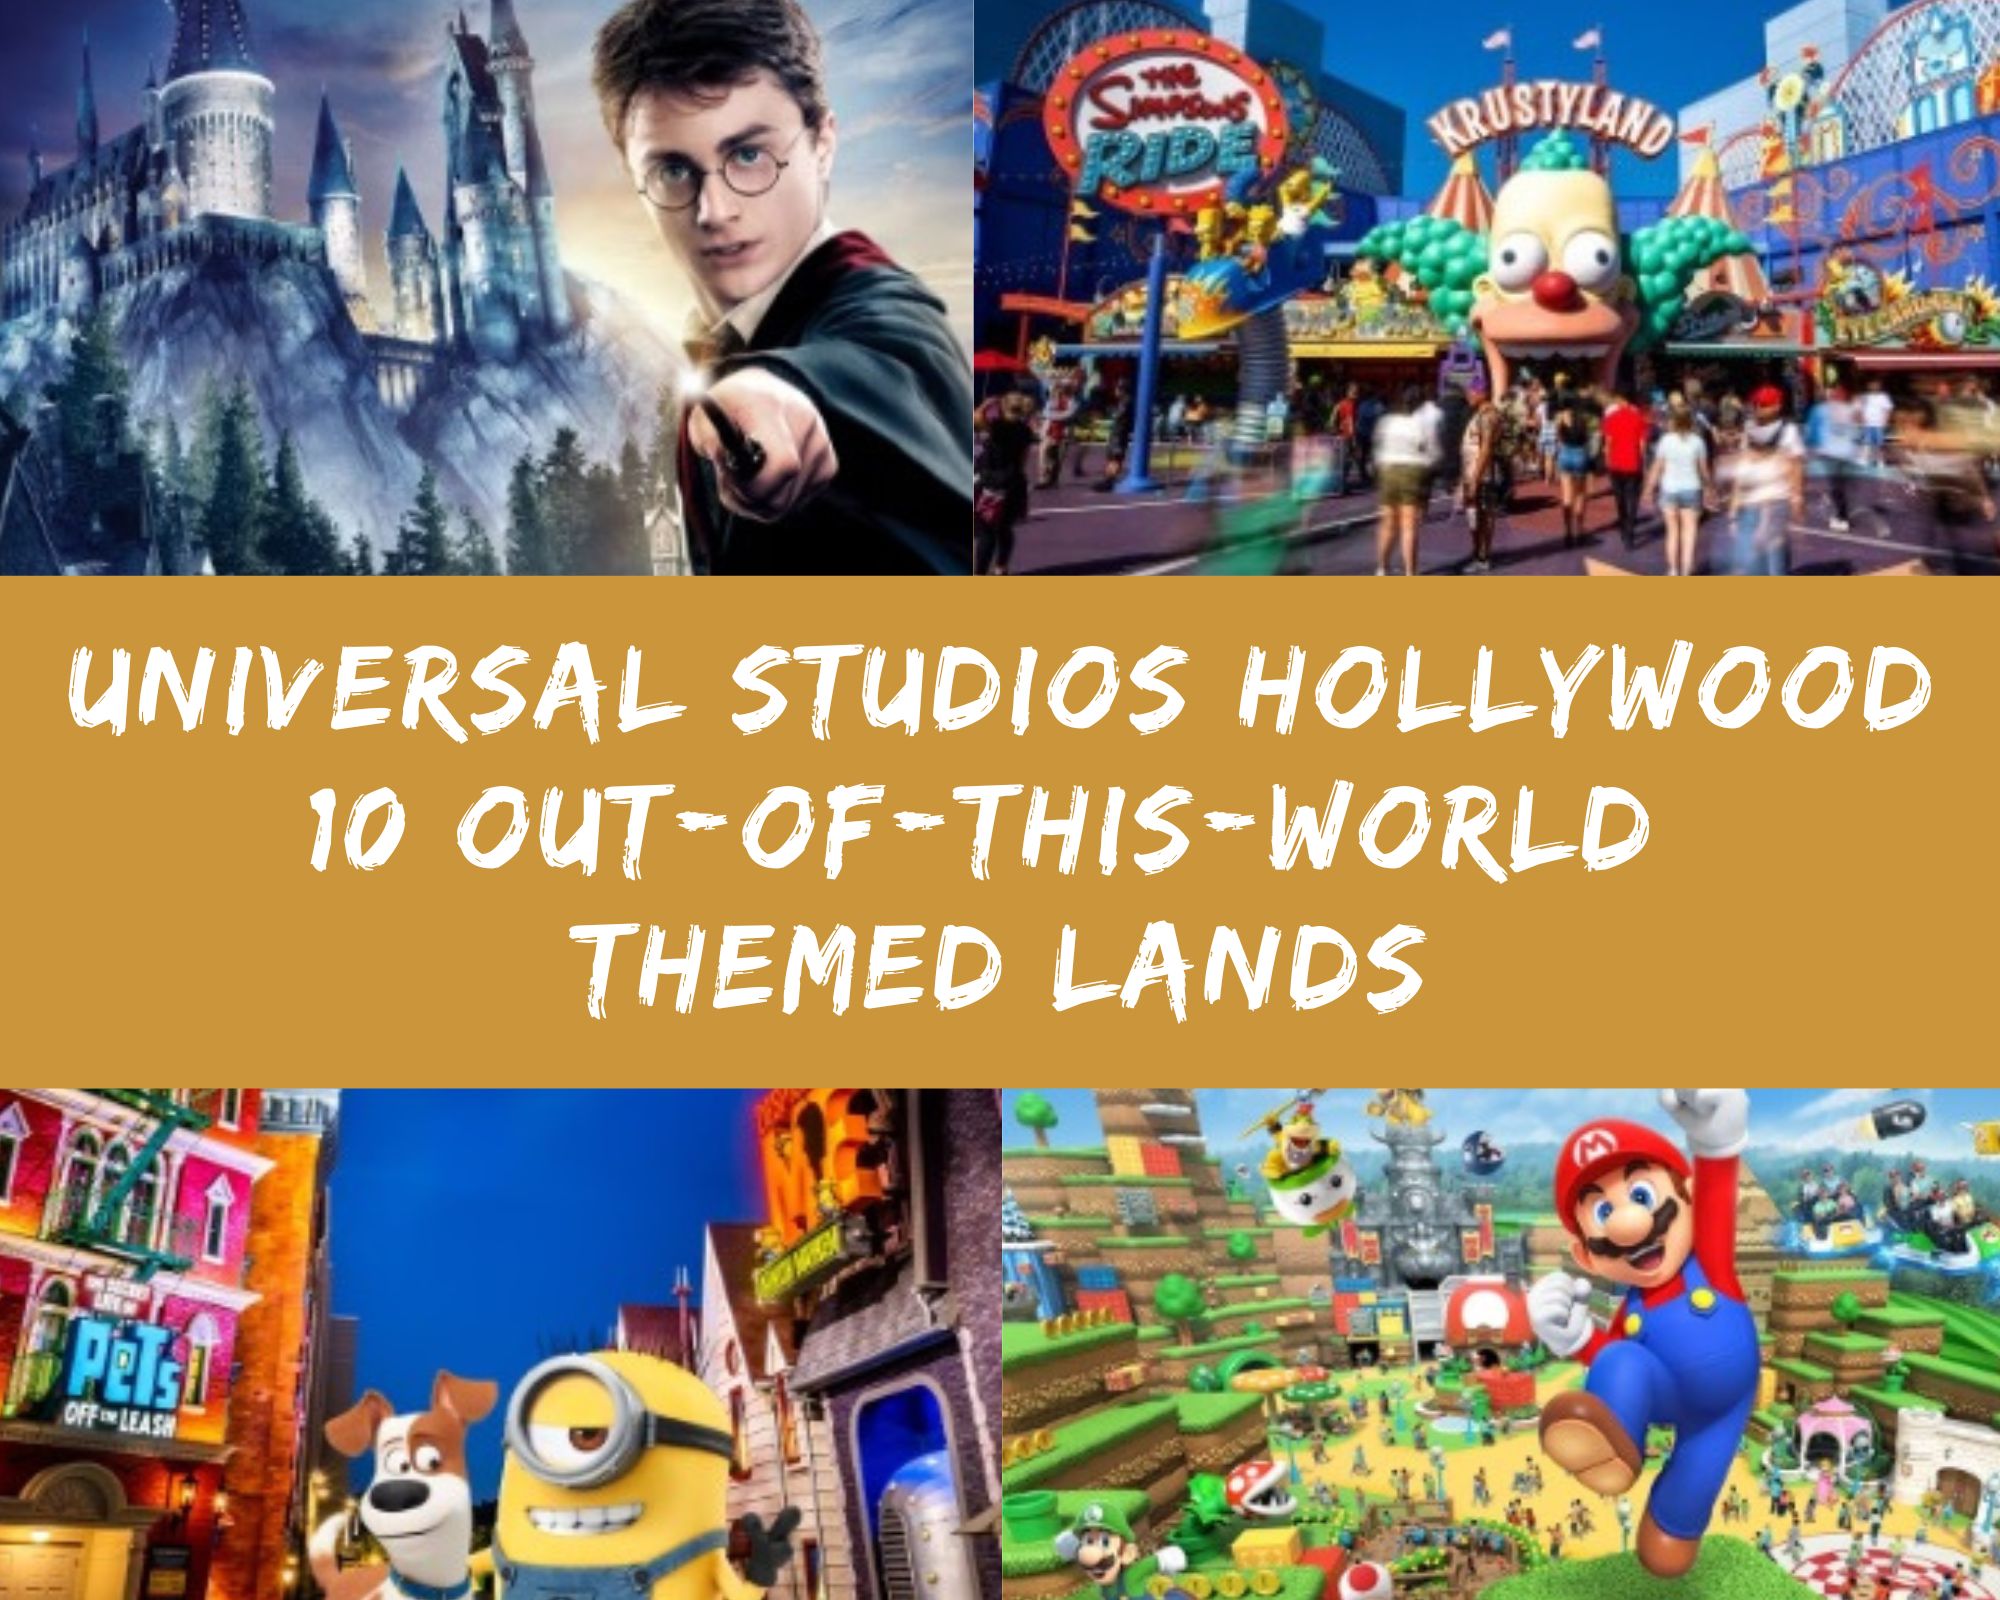 10 Out-of-This-World Themed Lands Universal Studios Hollywood